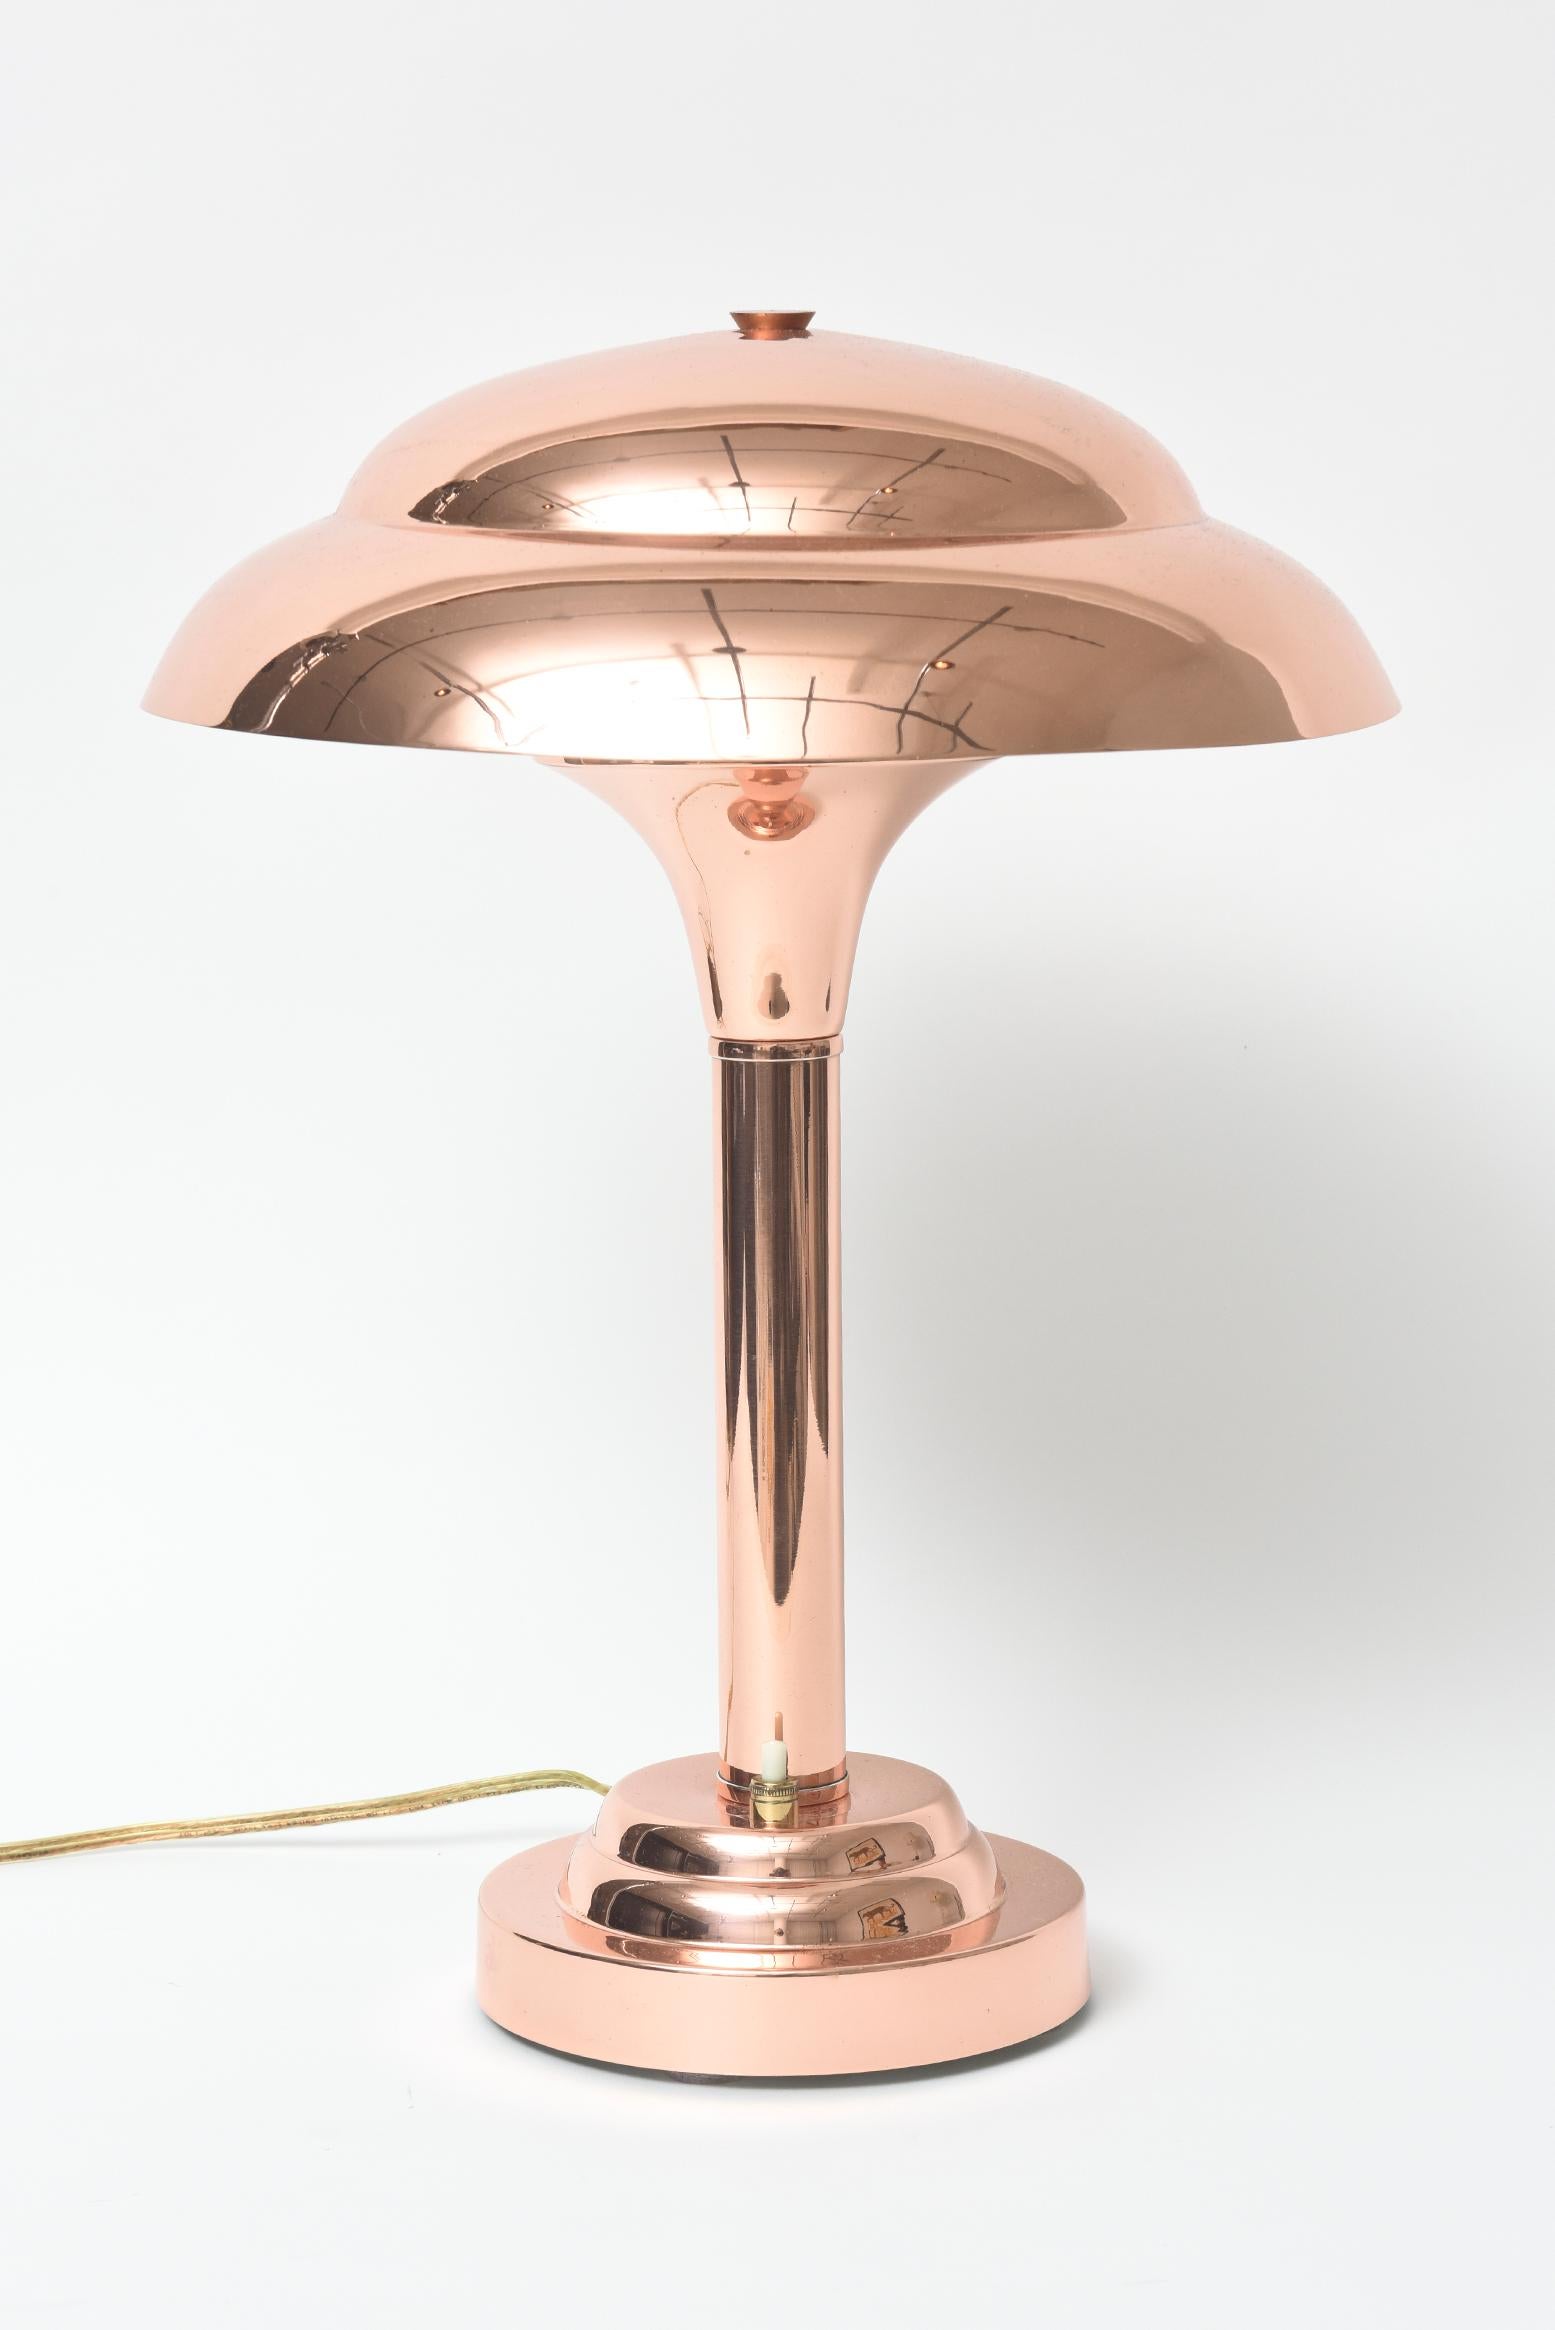 Stunning Art Deco copper lamp meant to sit on a desk or side table. It was manufactured in France during the 1920s to 1930s. The shade is a simple mushroom shape so that it reflects exactly the right amount of light to create the perfect atmosphere